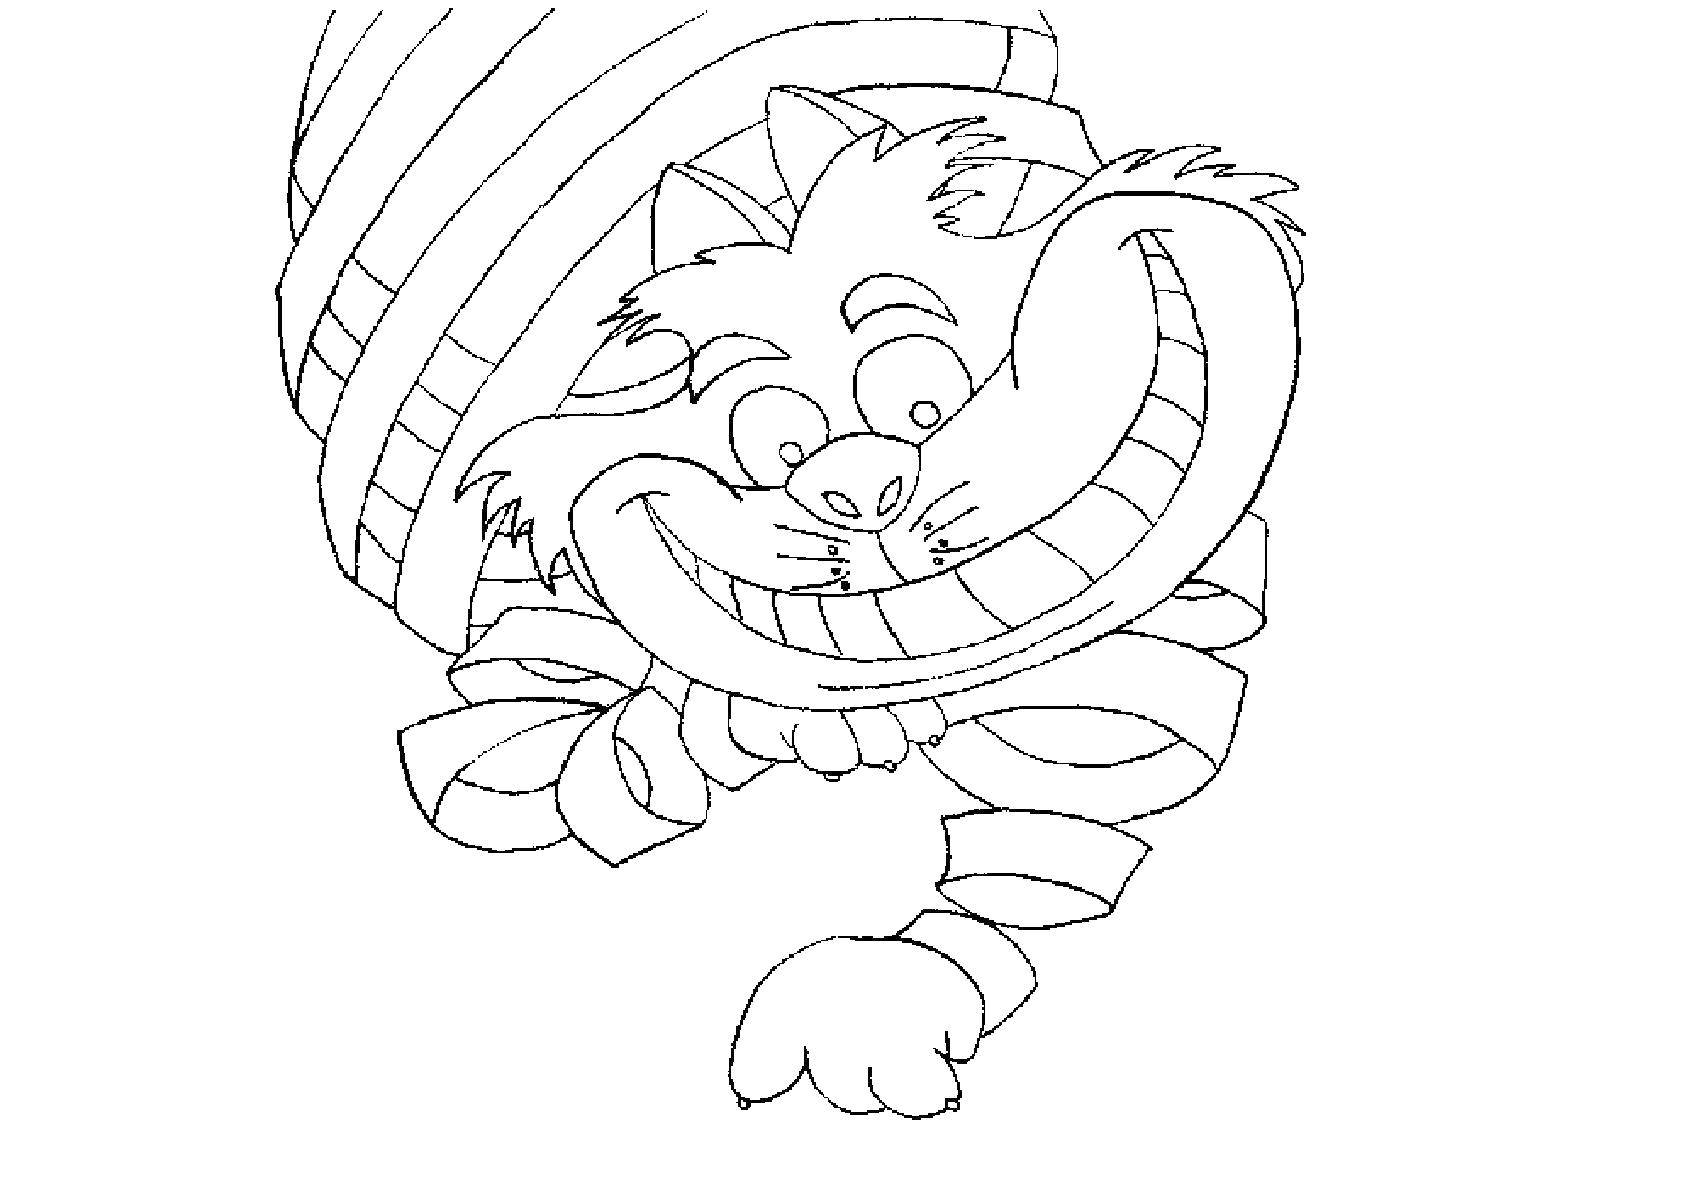 Coloring Striped Cheshire cat. Category coloring. Tags:  fairy tales , Alice in Wonderland, the Cheshire cat.